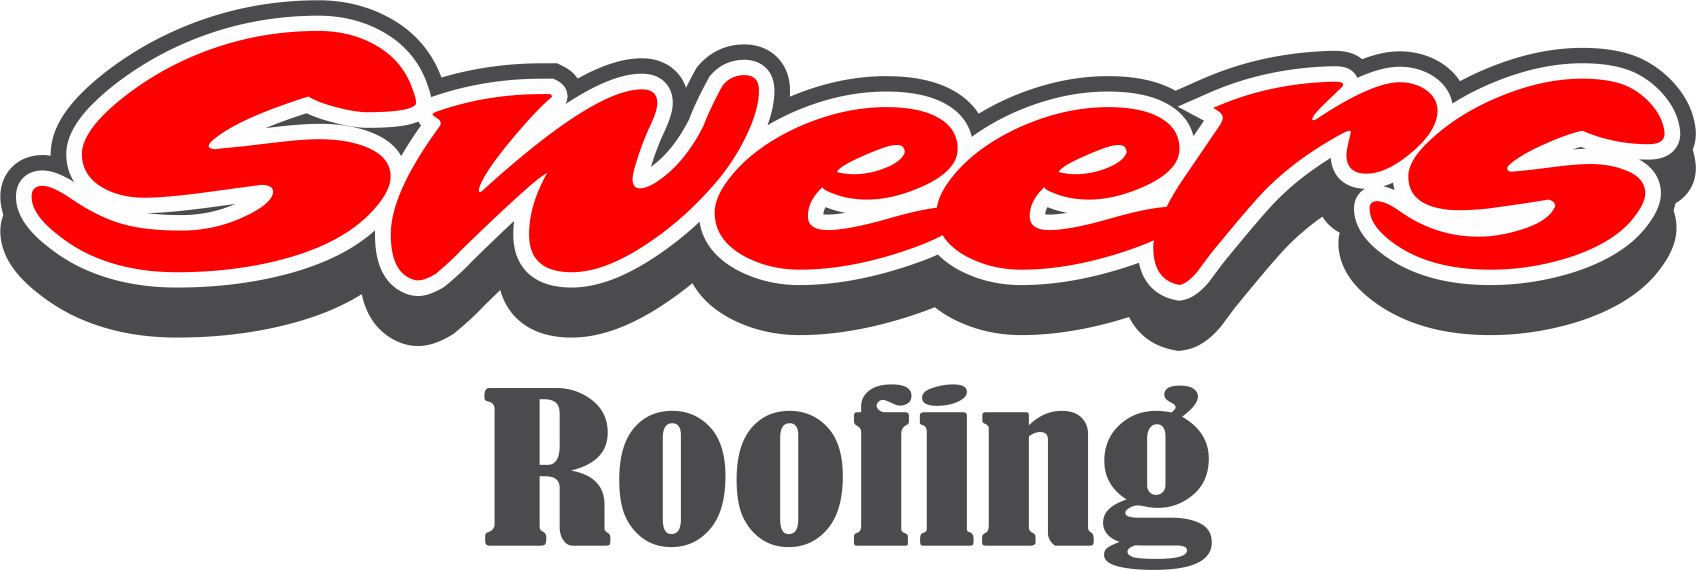 Sweers Eavestrough and Roofing Co, Inc